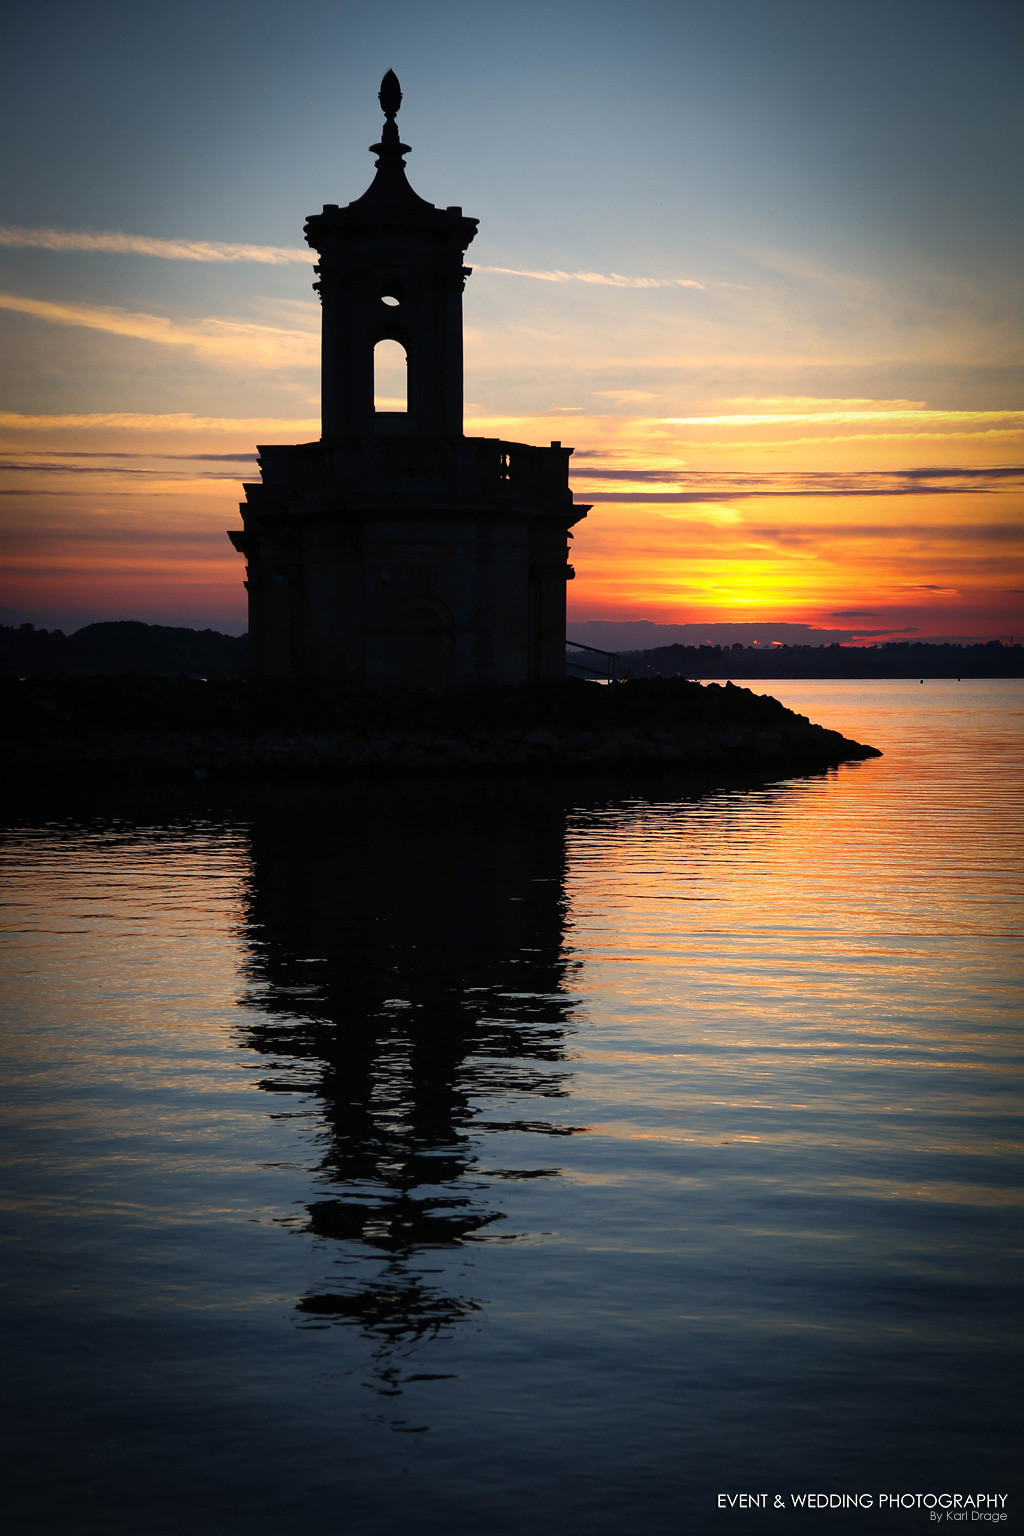 Gorgeous colours in this Normanton Church sunset © Karl Drage / eventandweddingphotography.co.uk